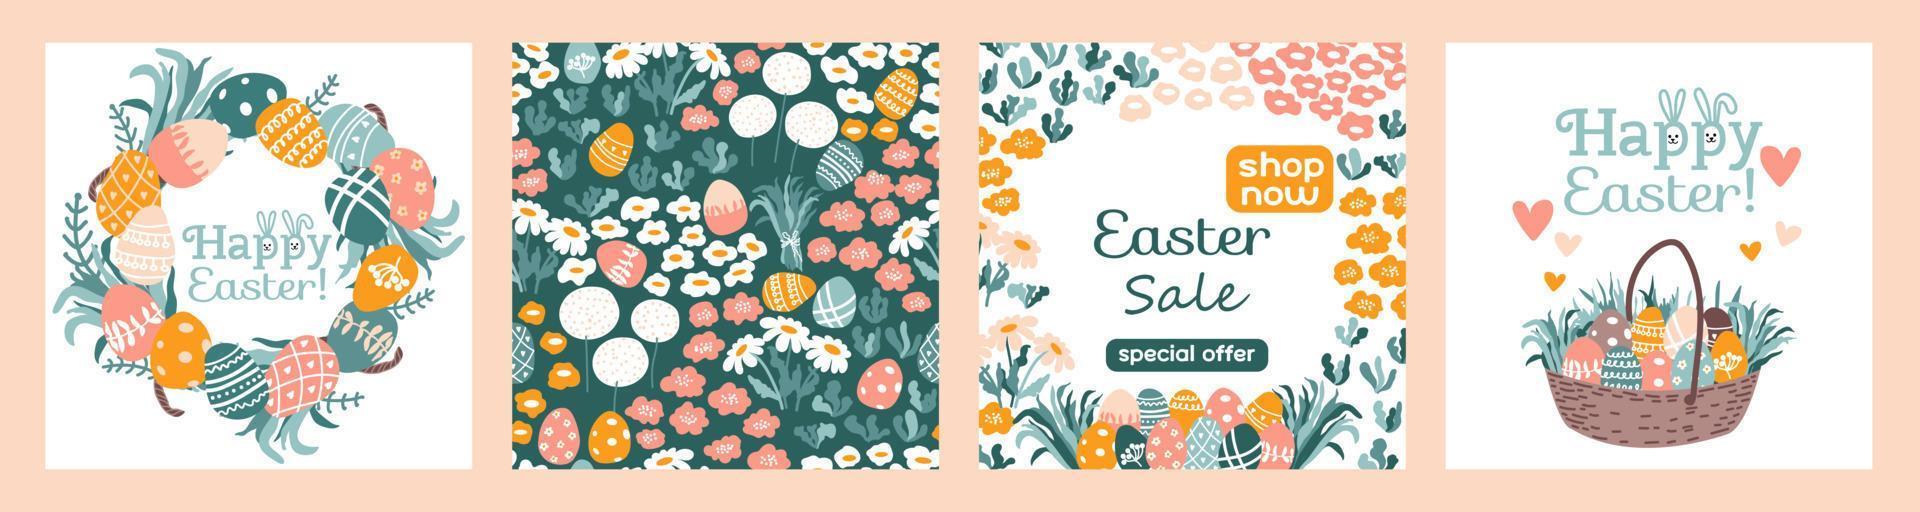 Happy Easter. Set with basket, painted eggs, flowers, herbs, grass.   Spring greeting cards with text. Seamless pattern. Sale. vector